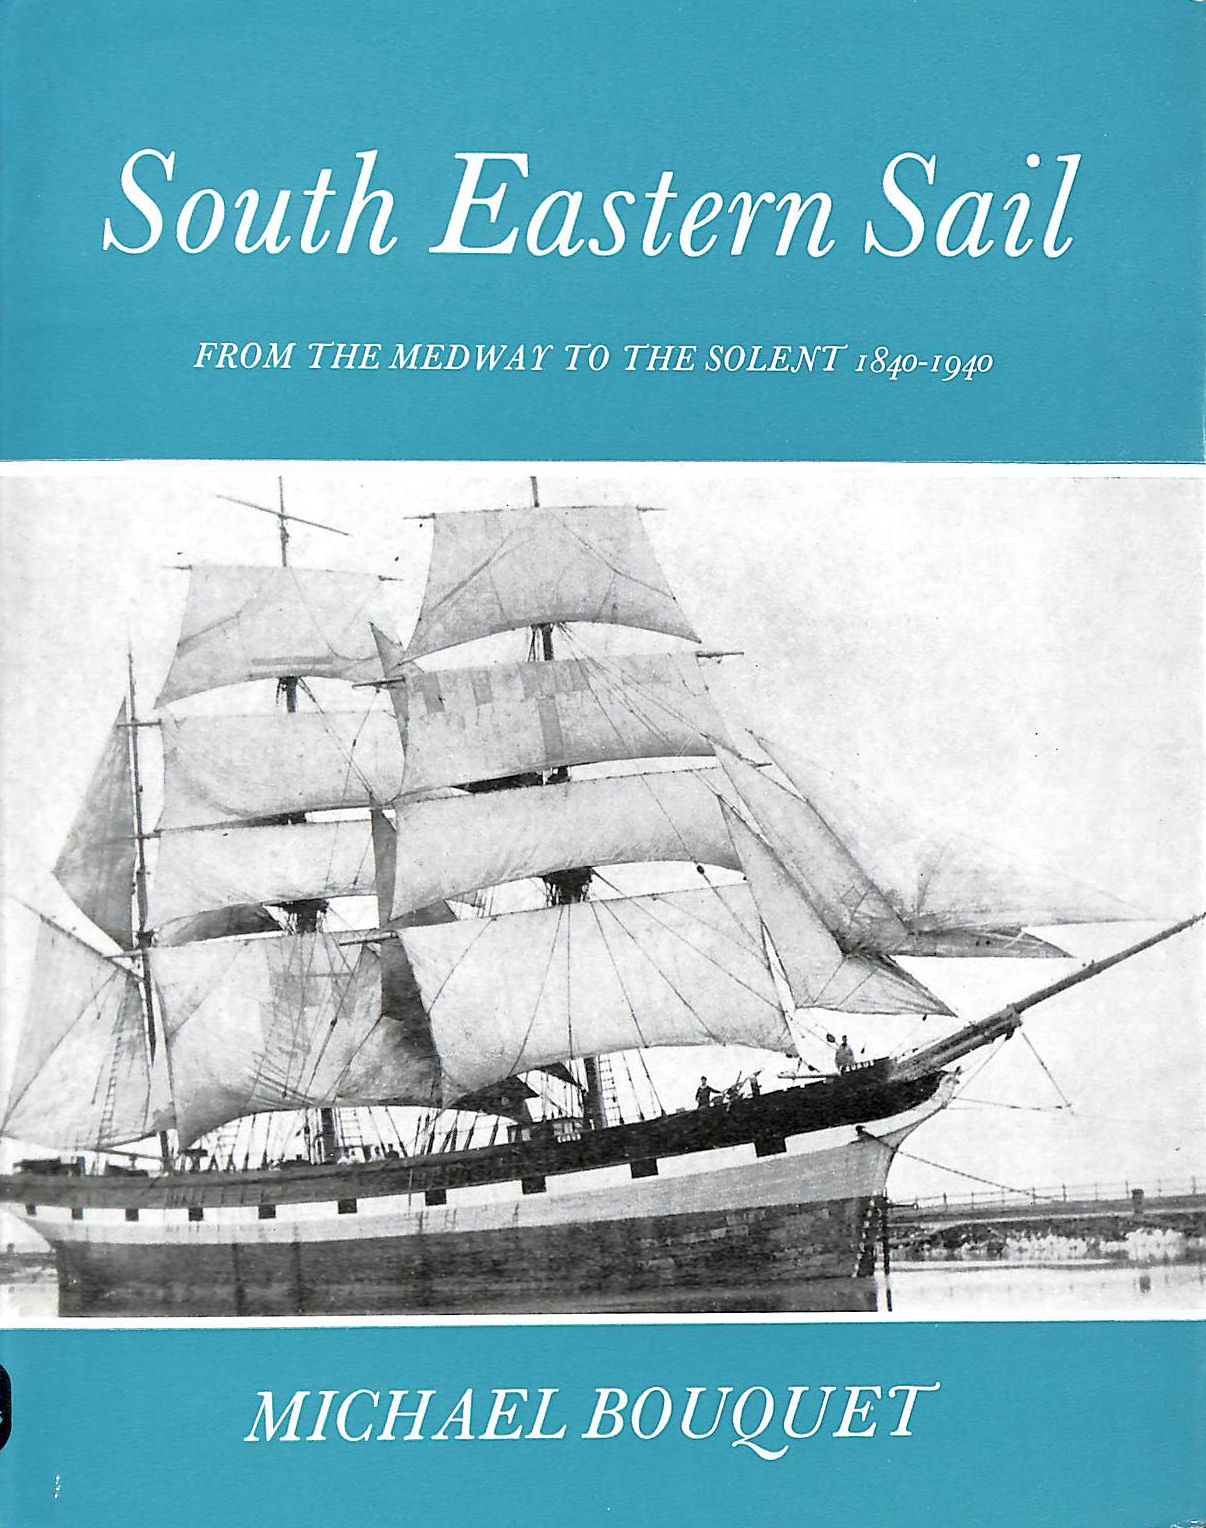 BOUQUET, MICHAEL - South Eastern Sail: From The Medway To The Solent, 1840-1940